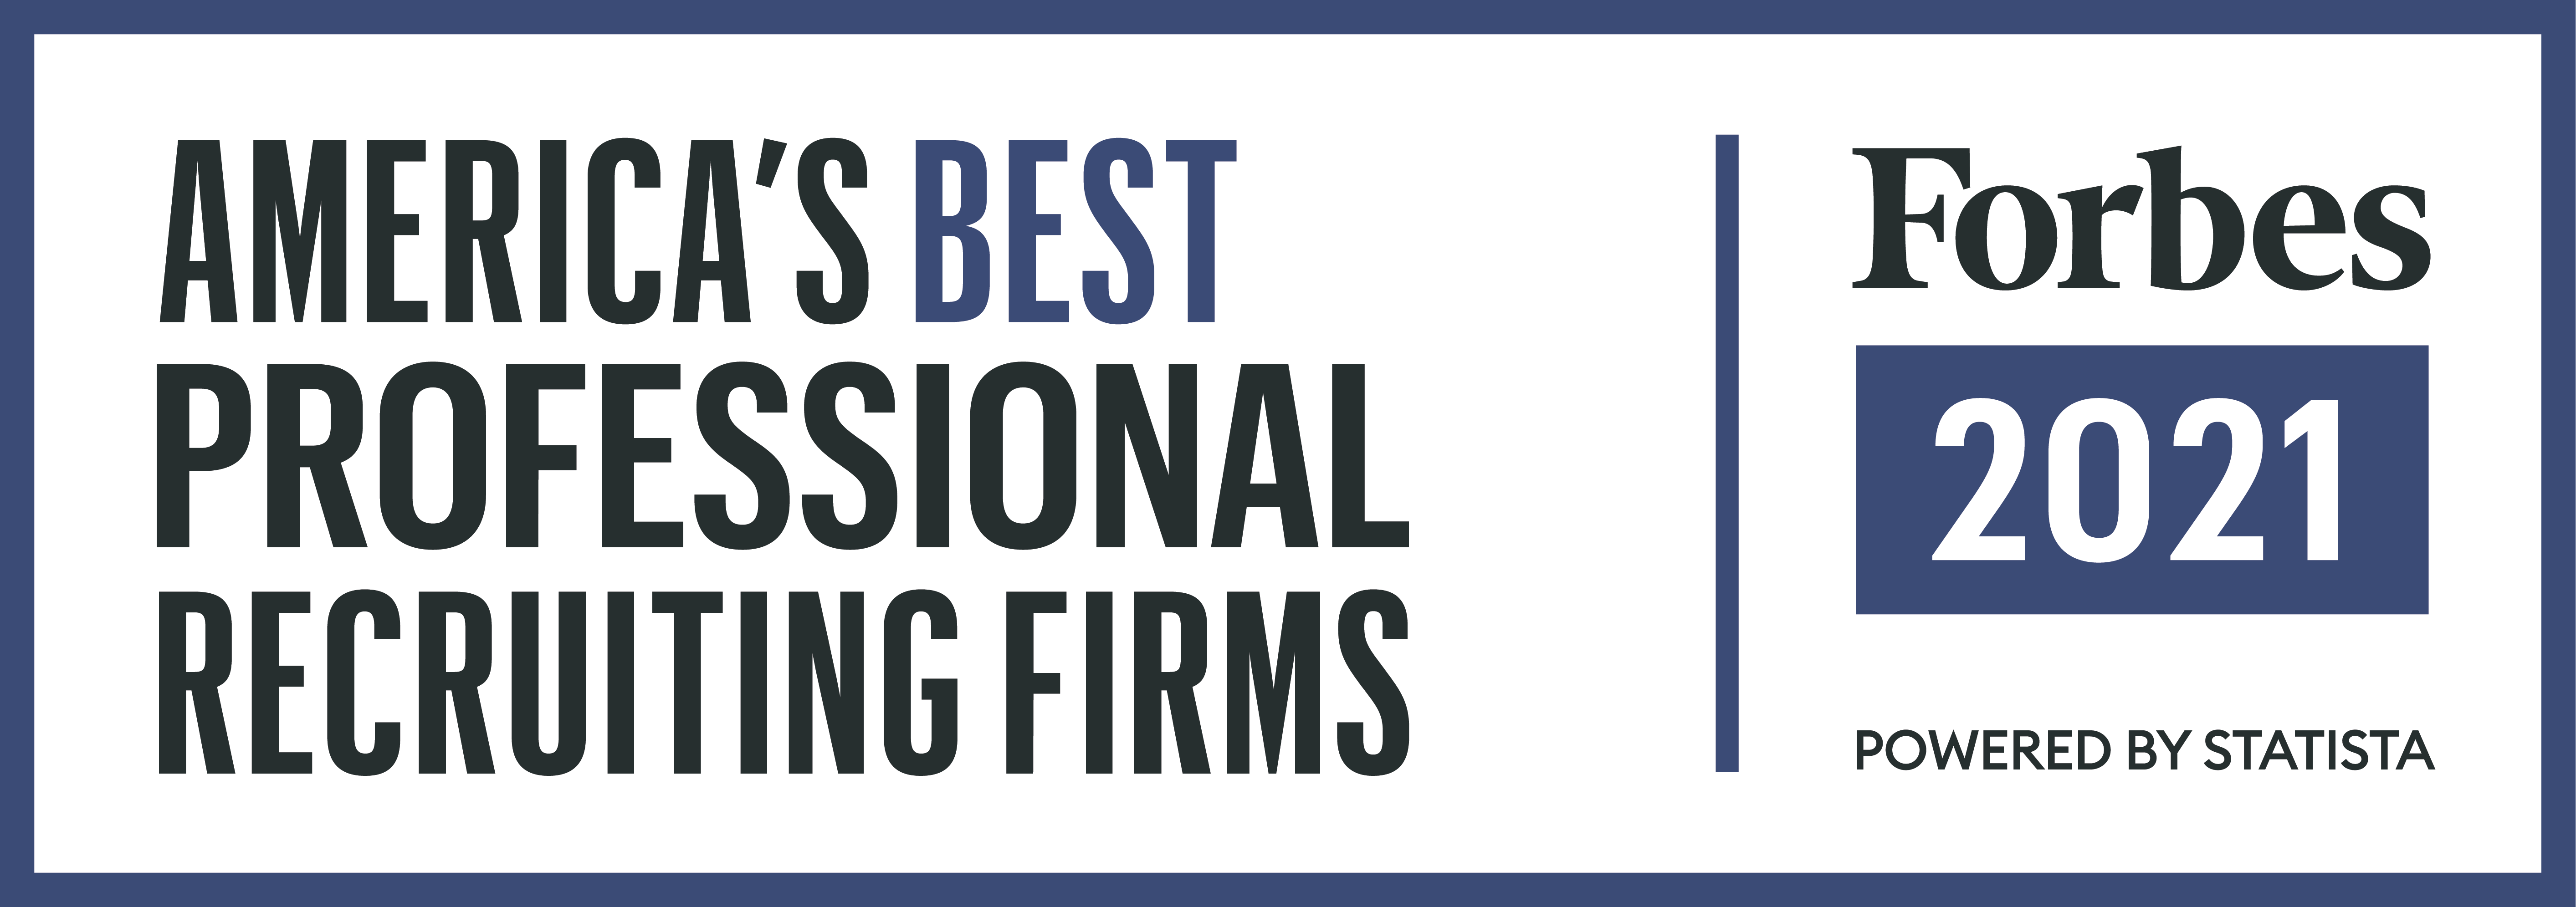 Forbes 2021 America's Best Professional Recruiting Firms